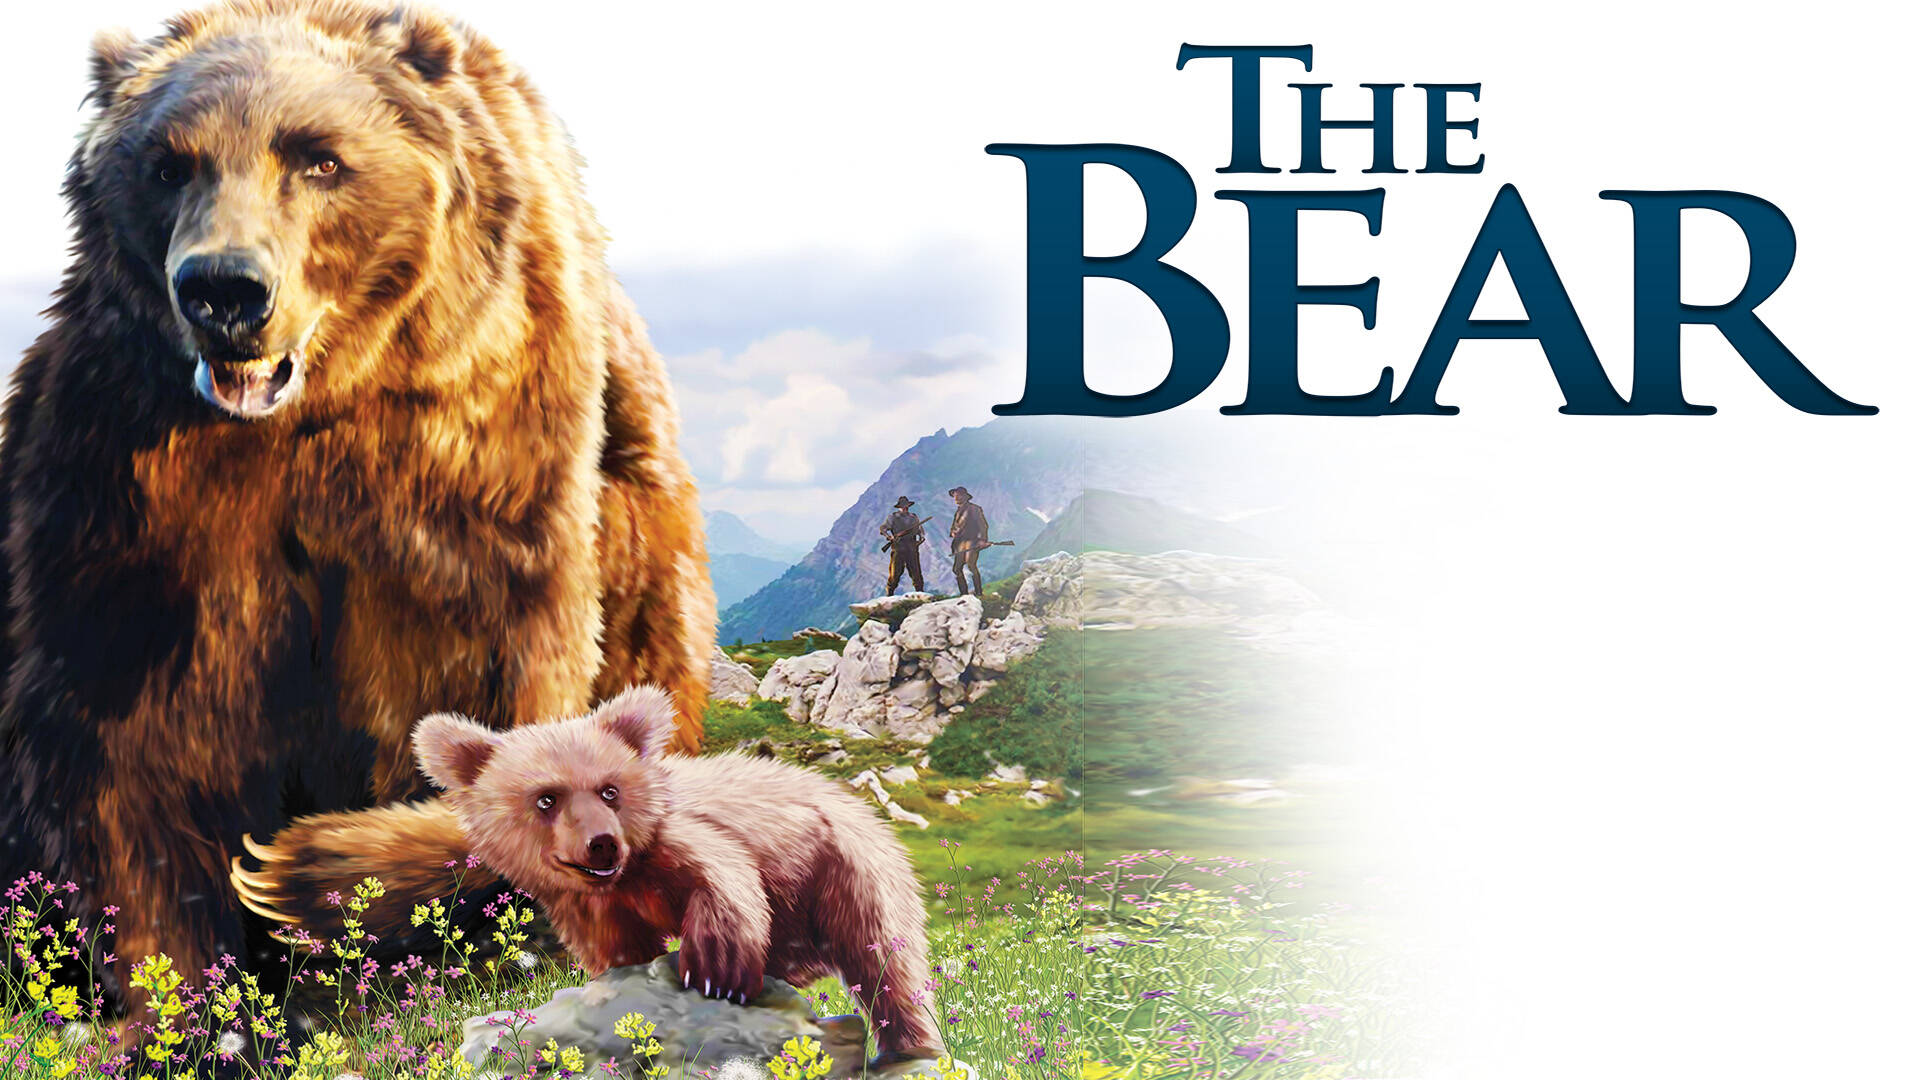 36-facts-about-the-movie-the-bear